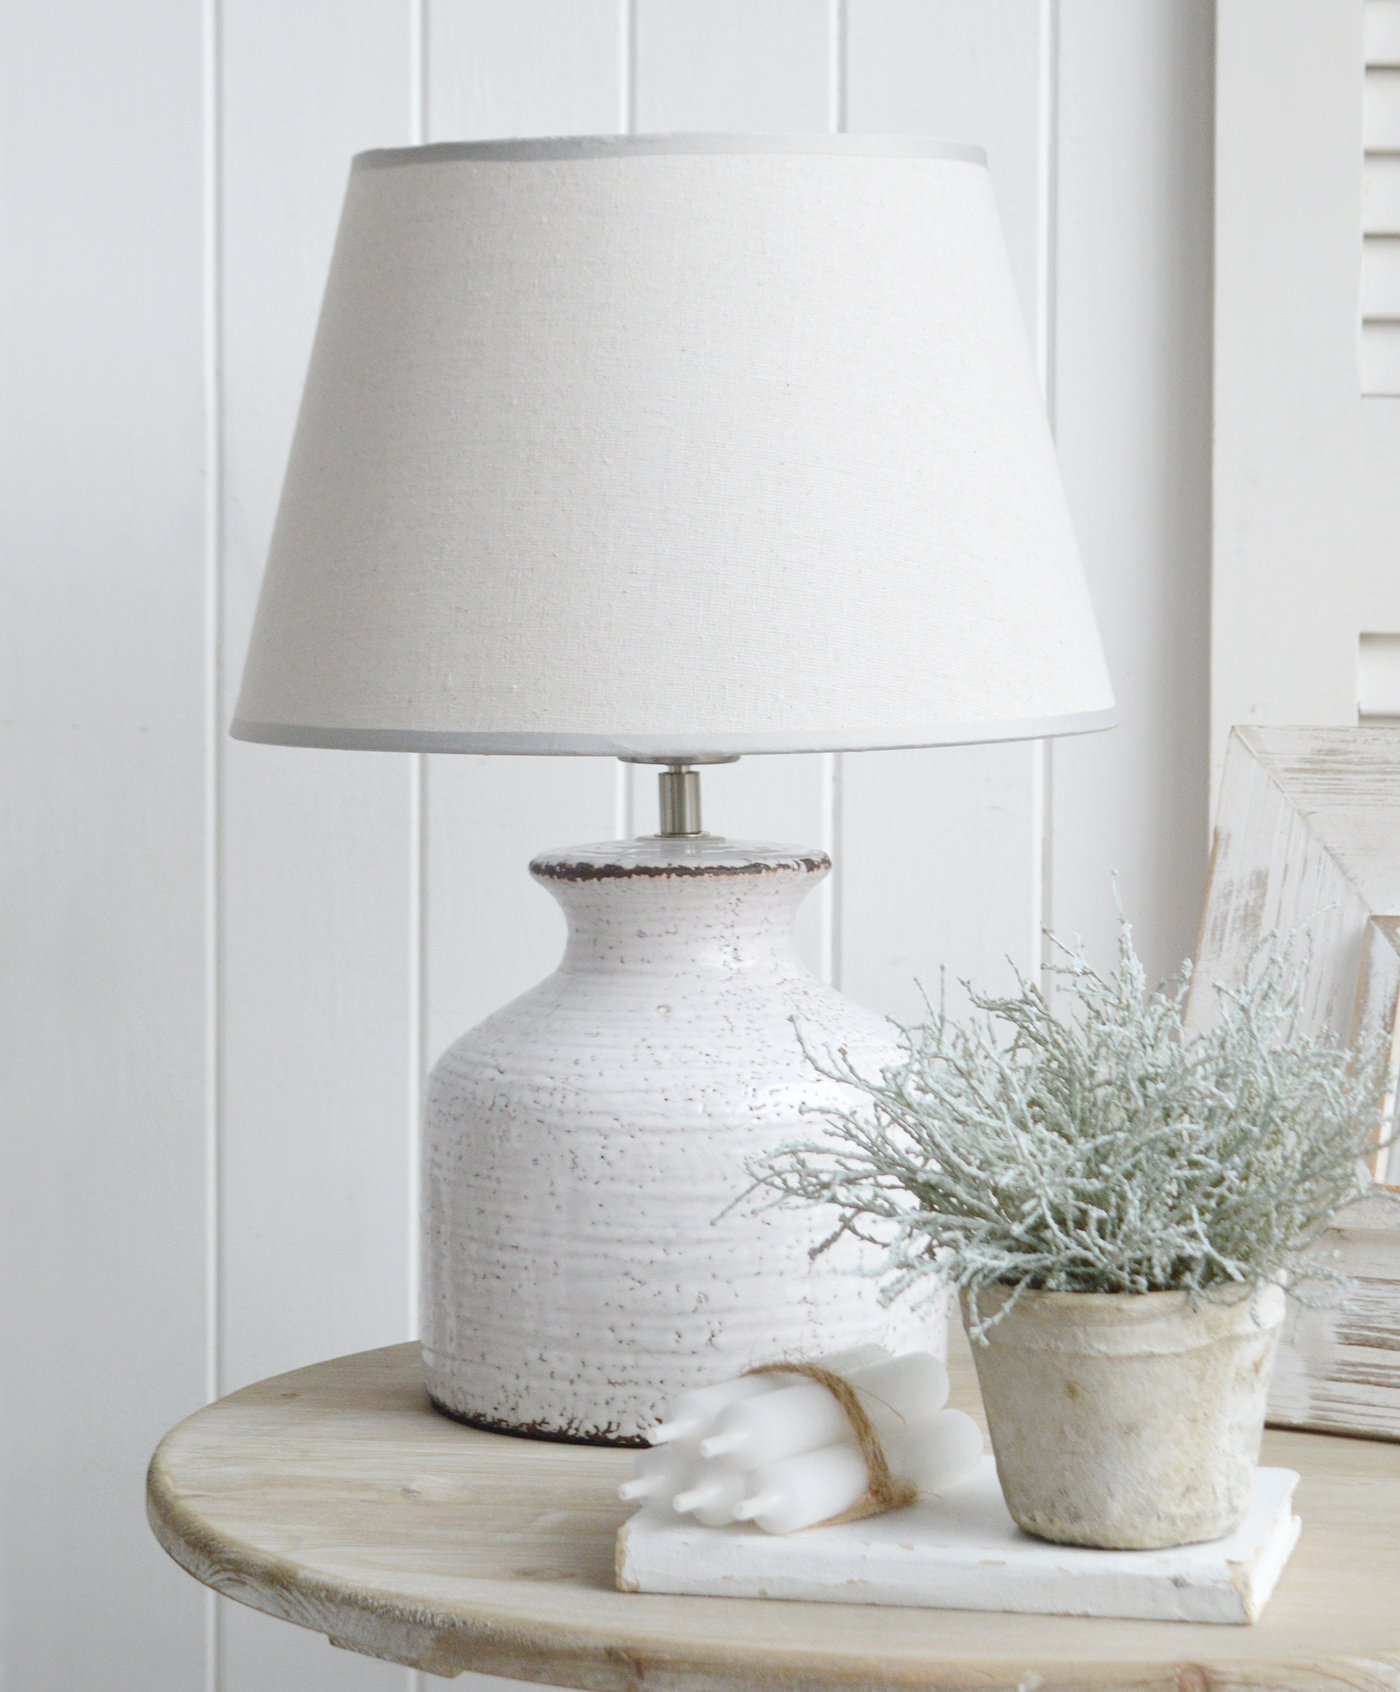 The White Compton white ceramic lamp with a glazed finish for Hamptons coasta homes and interiors in UK